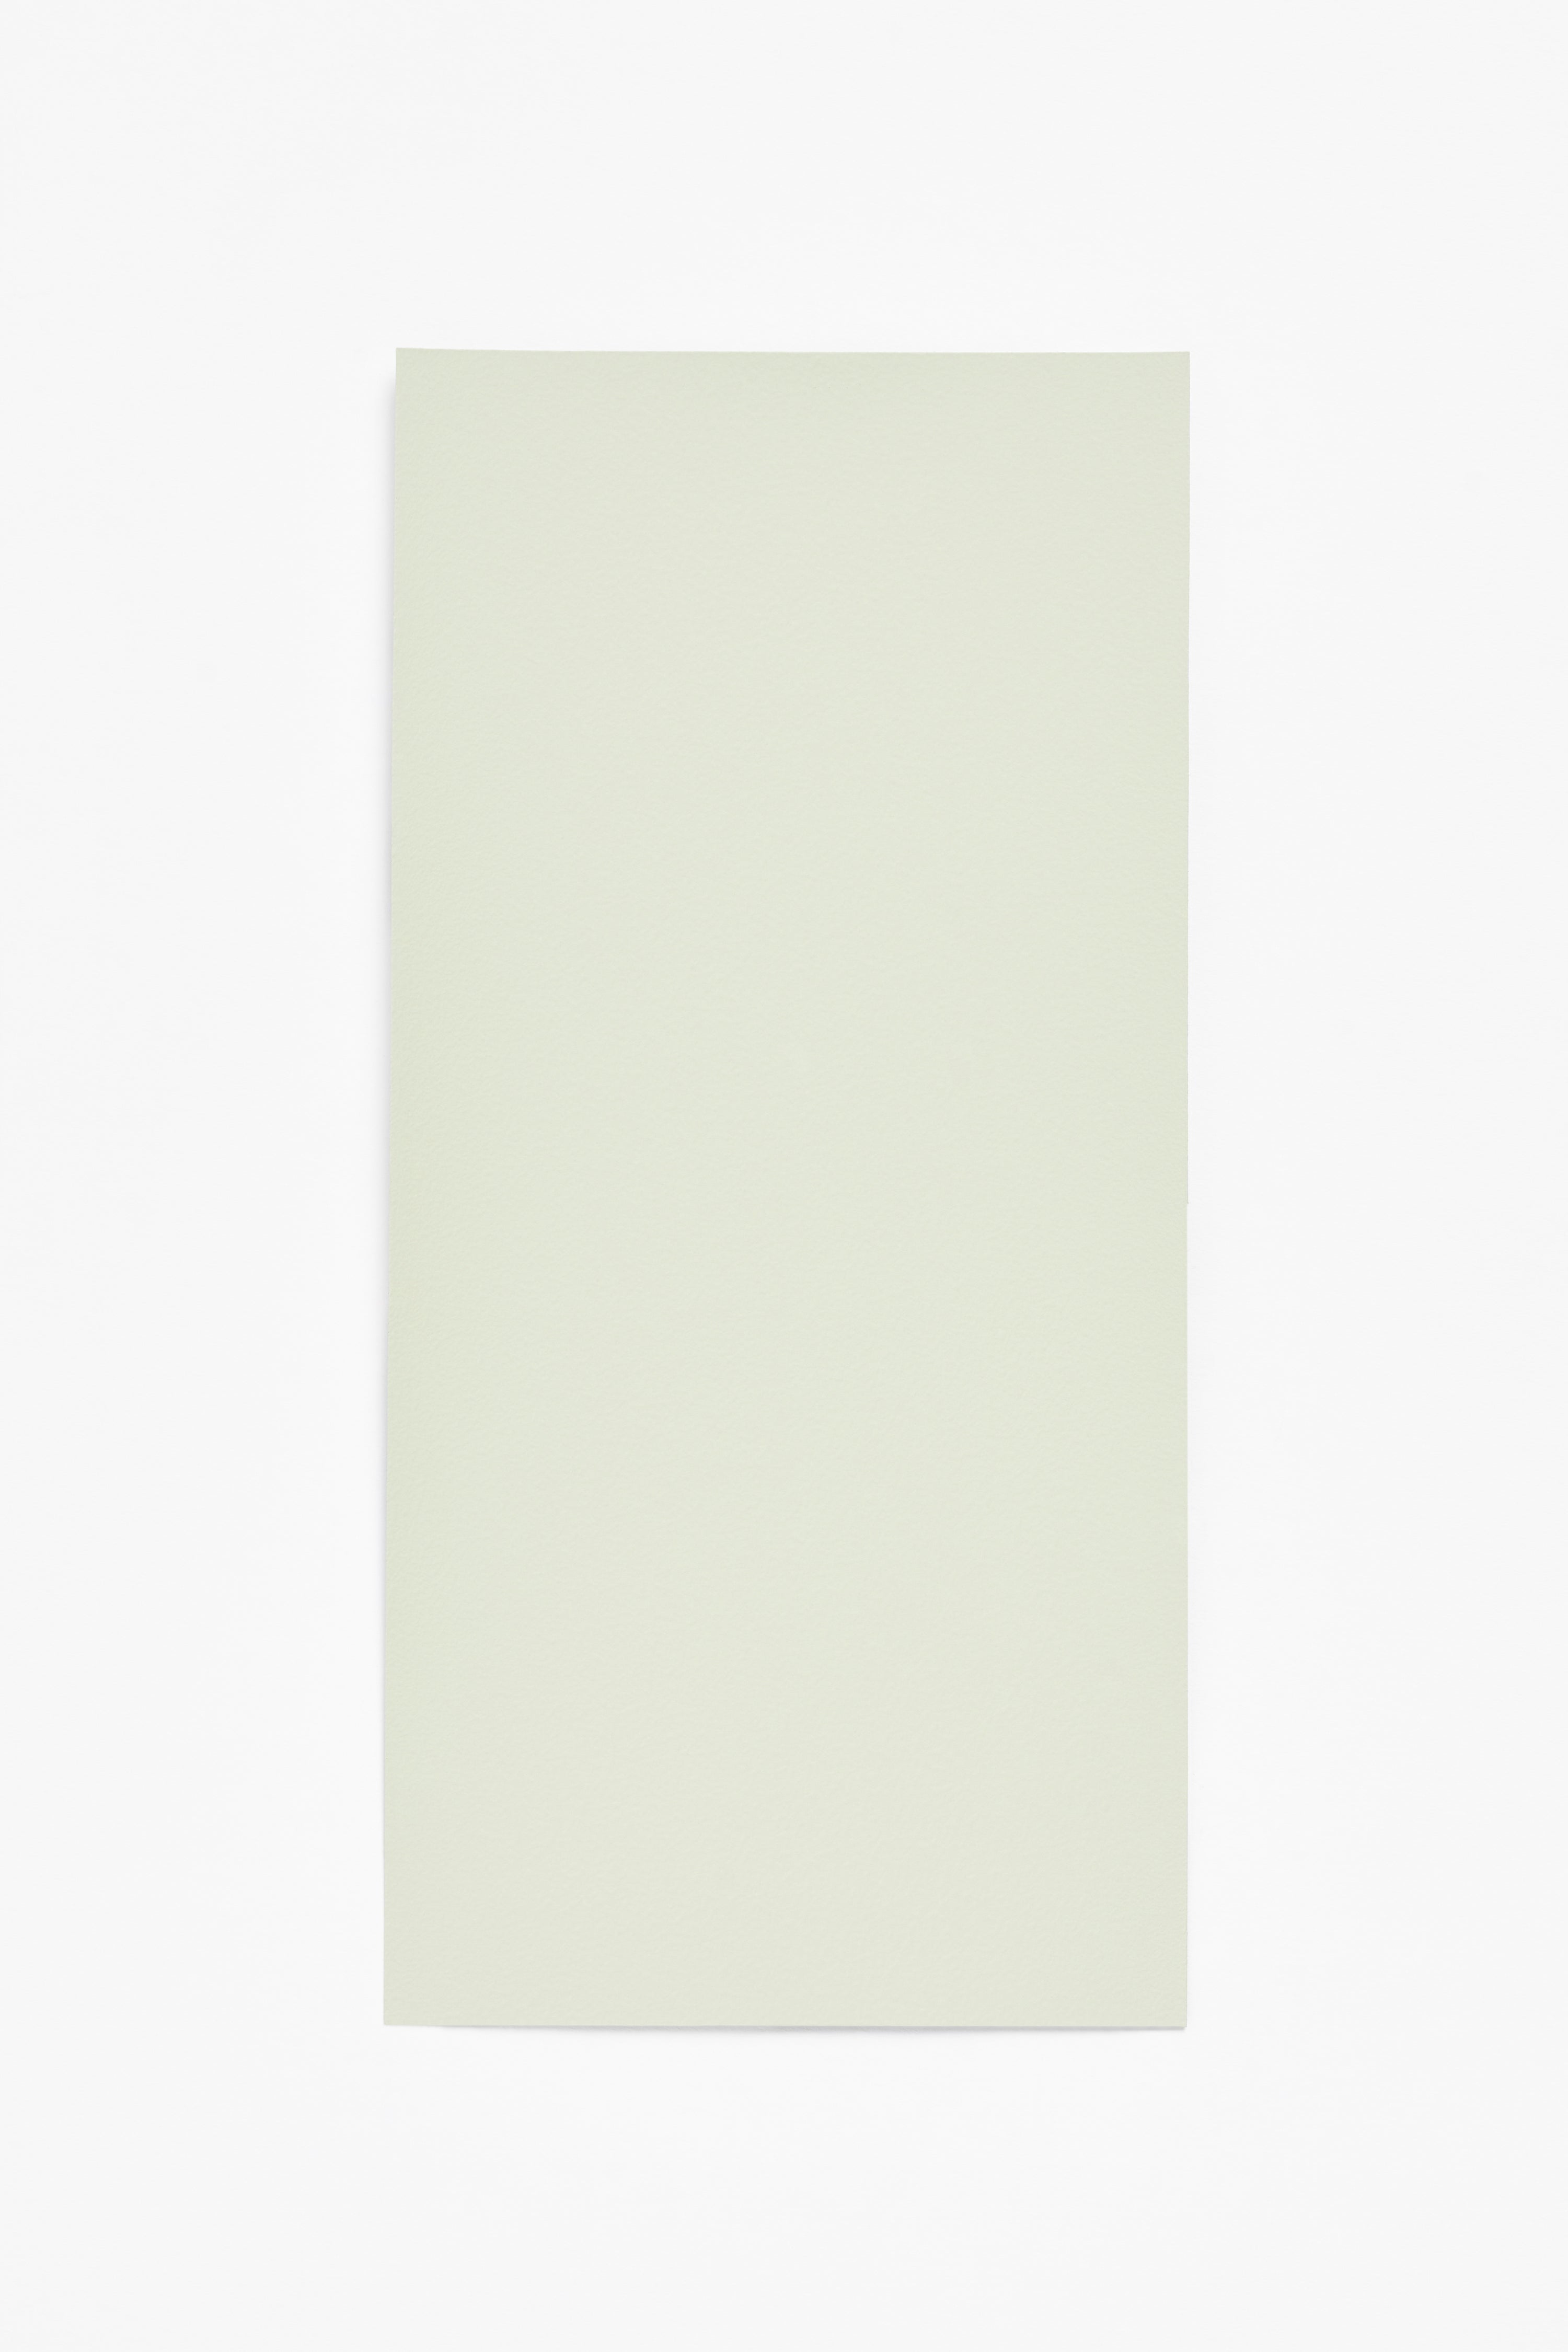 Absinthe — a paint colour developed by Halleroed for Blēo